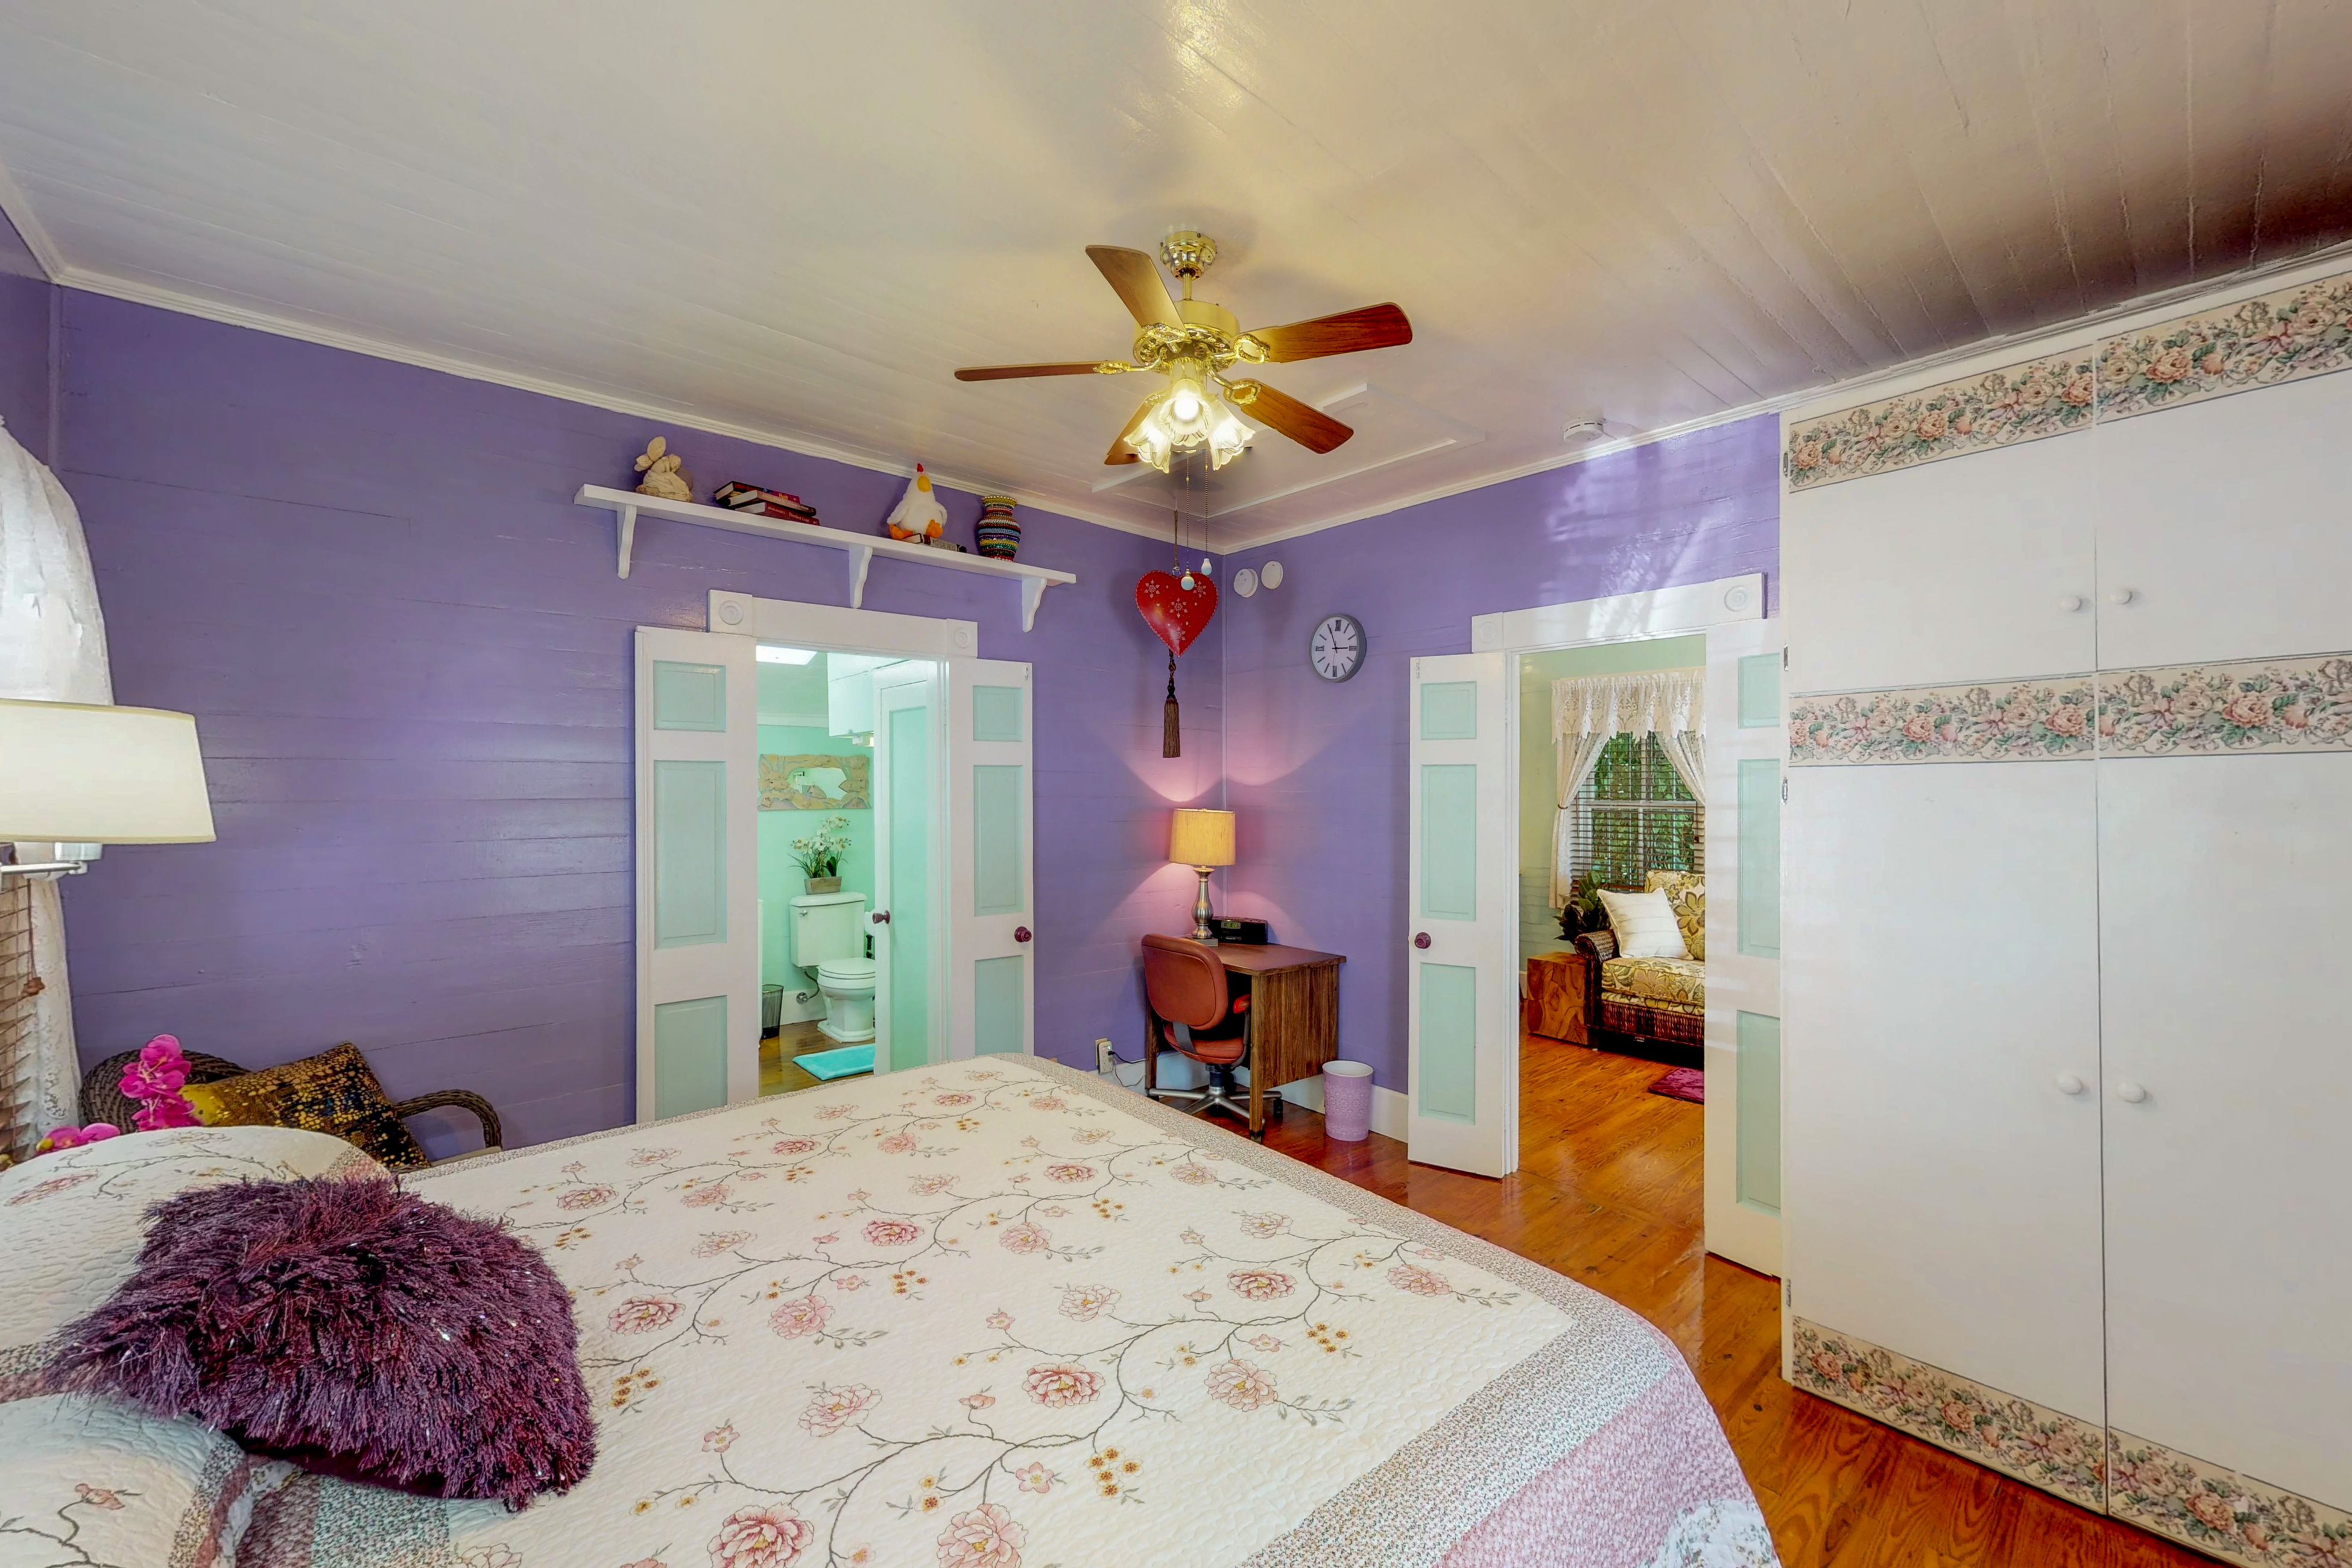 Gingerbread House / Cottage rental in Beach House Rentals Key West in Key West Florida - #16